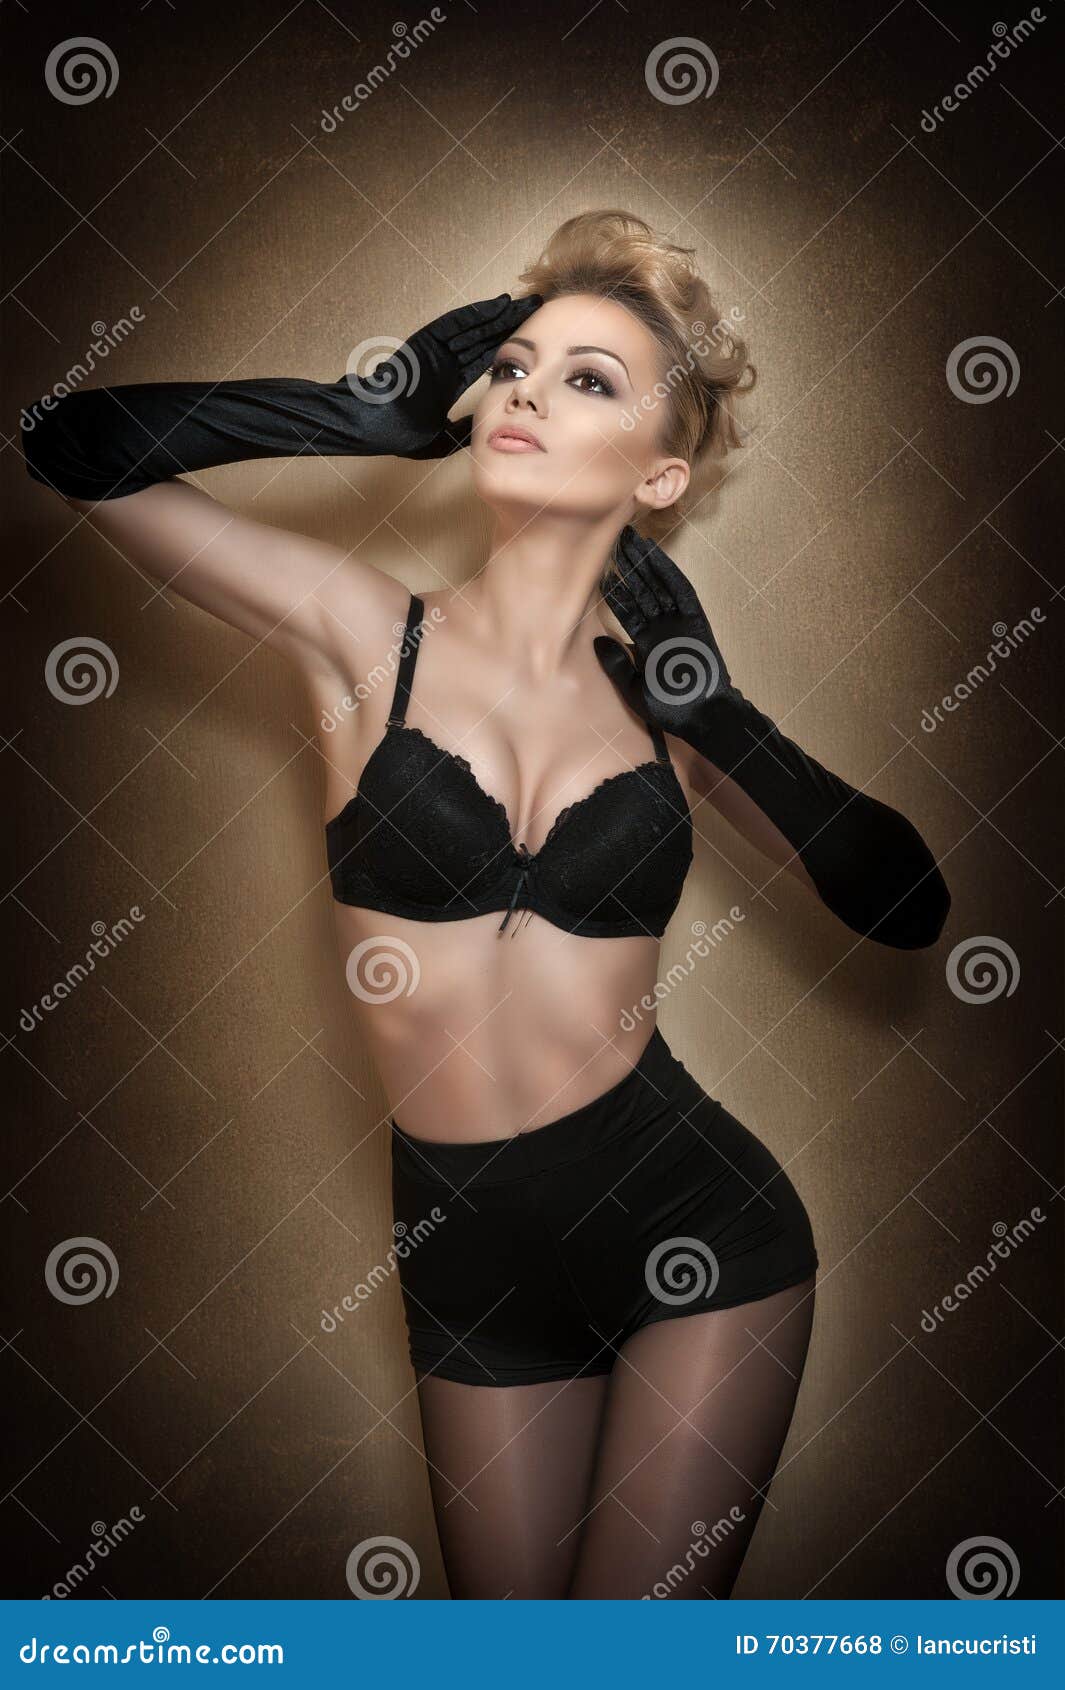 Attractive Fair Hair Model with Pantyhose and Black Gloves Posing  Provocatively. Fashion Portrait of Sensual Short Hair Blonde Stock Photo -  Image of fashion, hair: 70377668